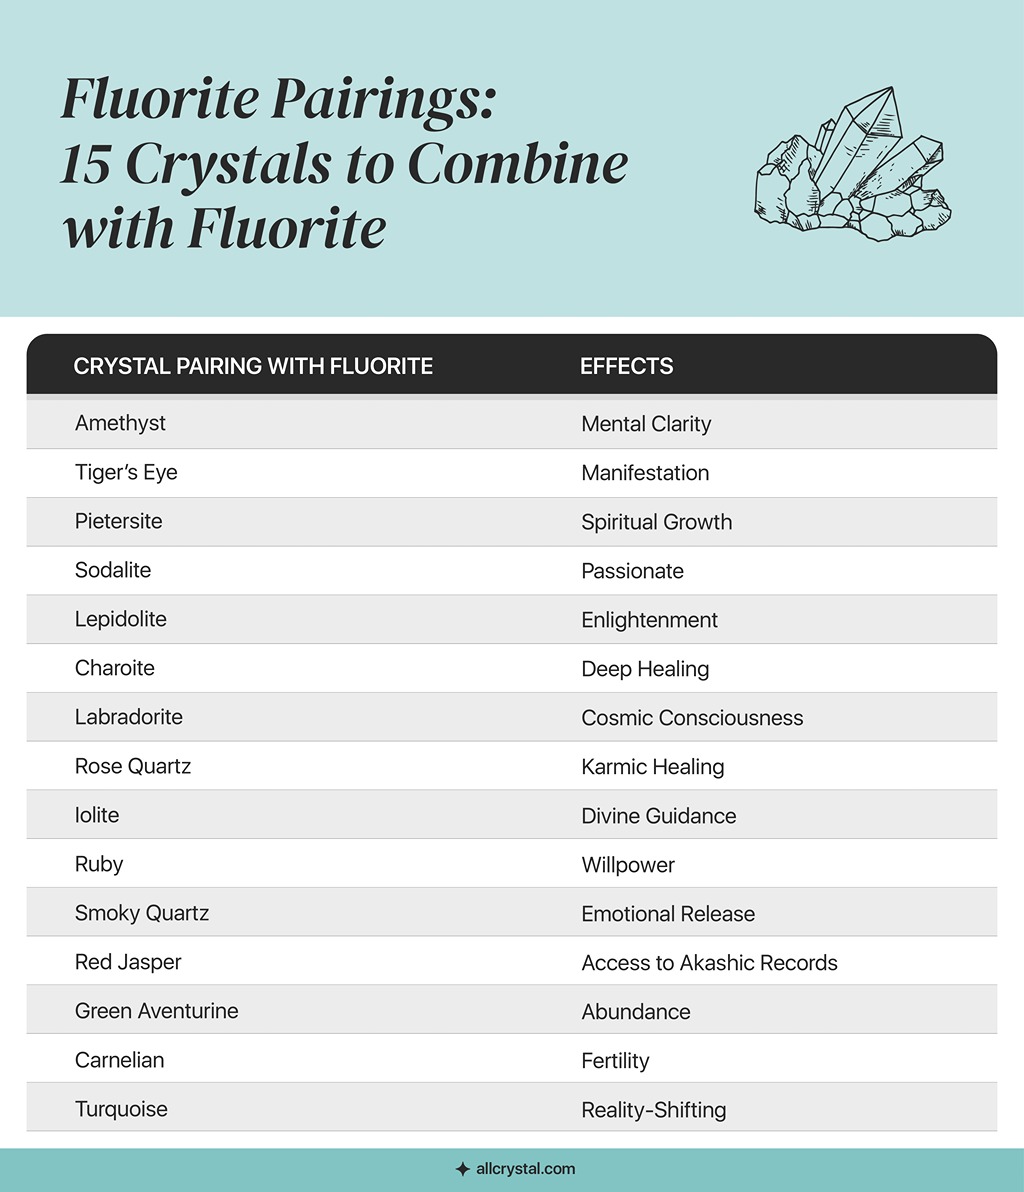 A custom graphic table for Fluorite pairings